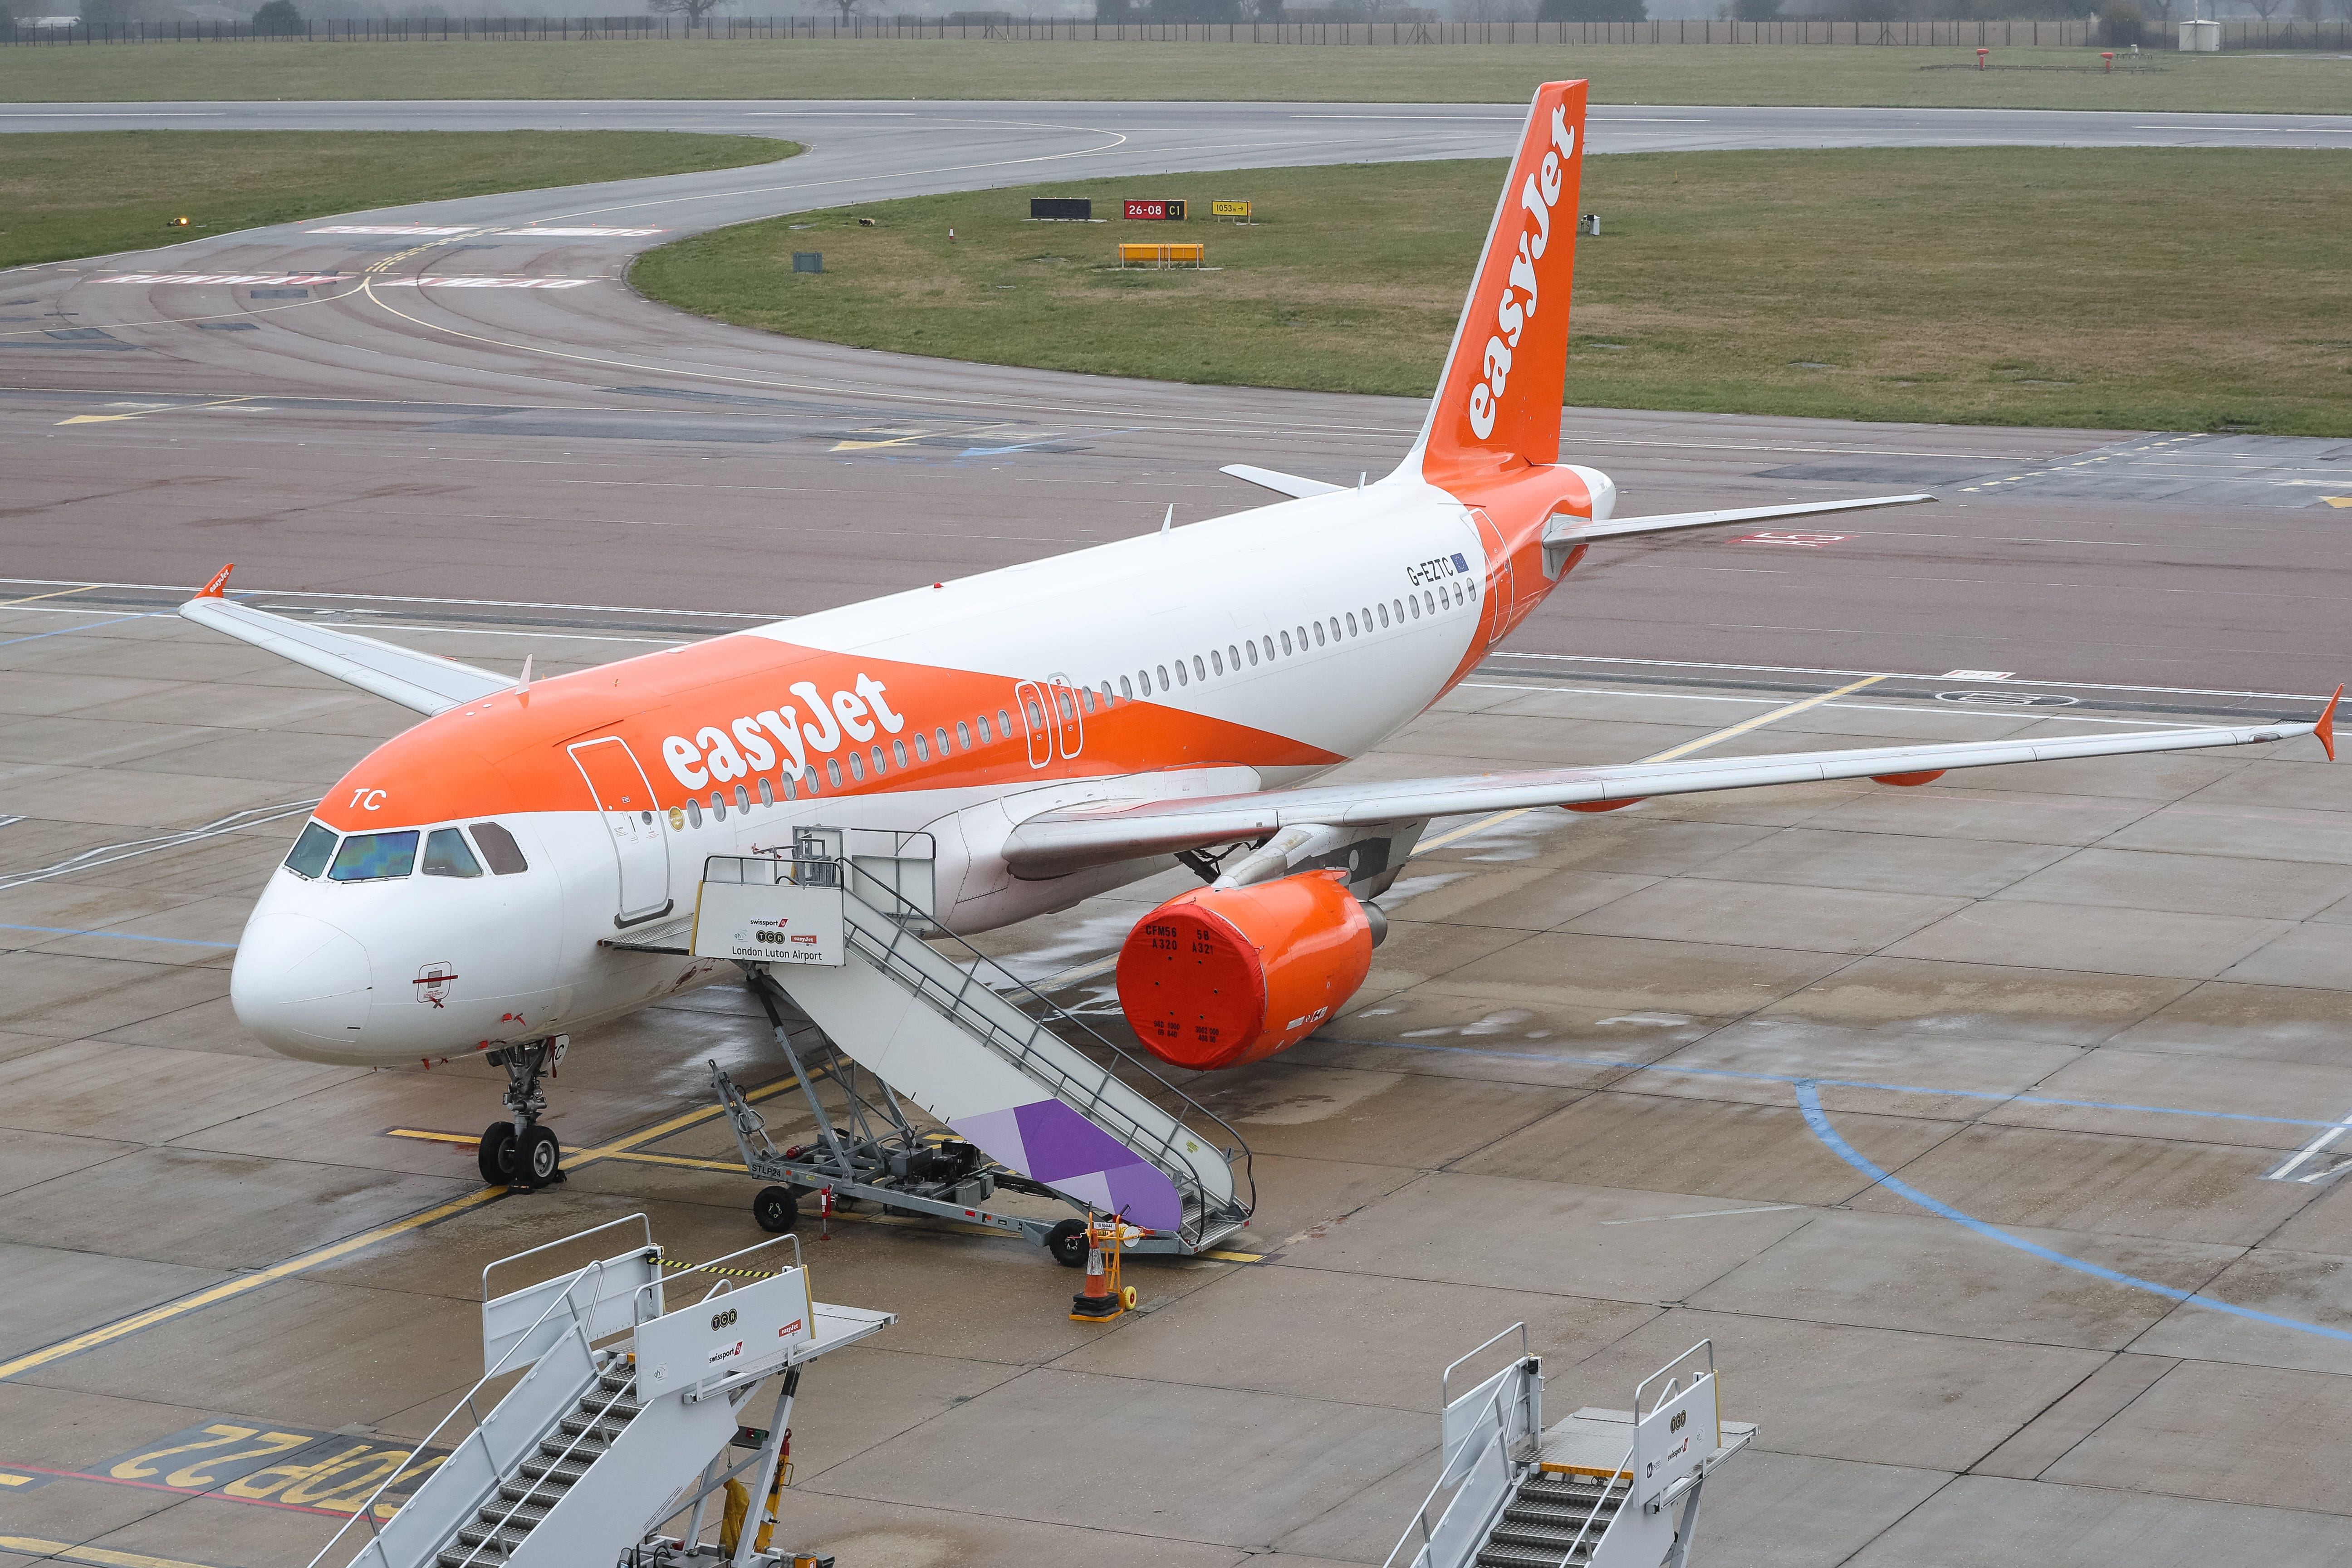 Children aged seven to 12 will be invited to go behind the scenes at easyJet’s training centre for hands-on experience with pilots (Alamy/PA)